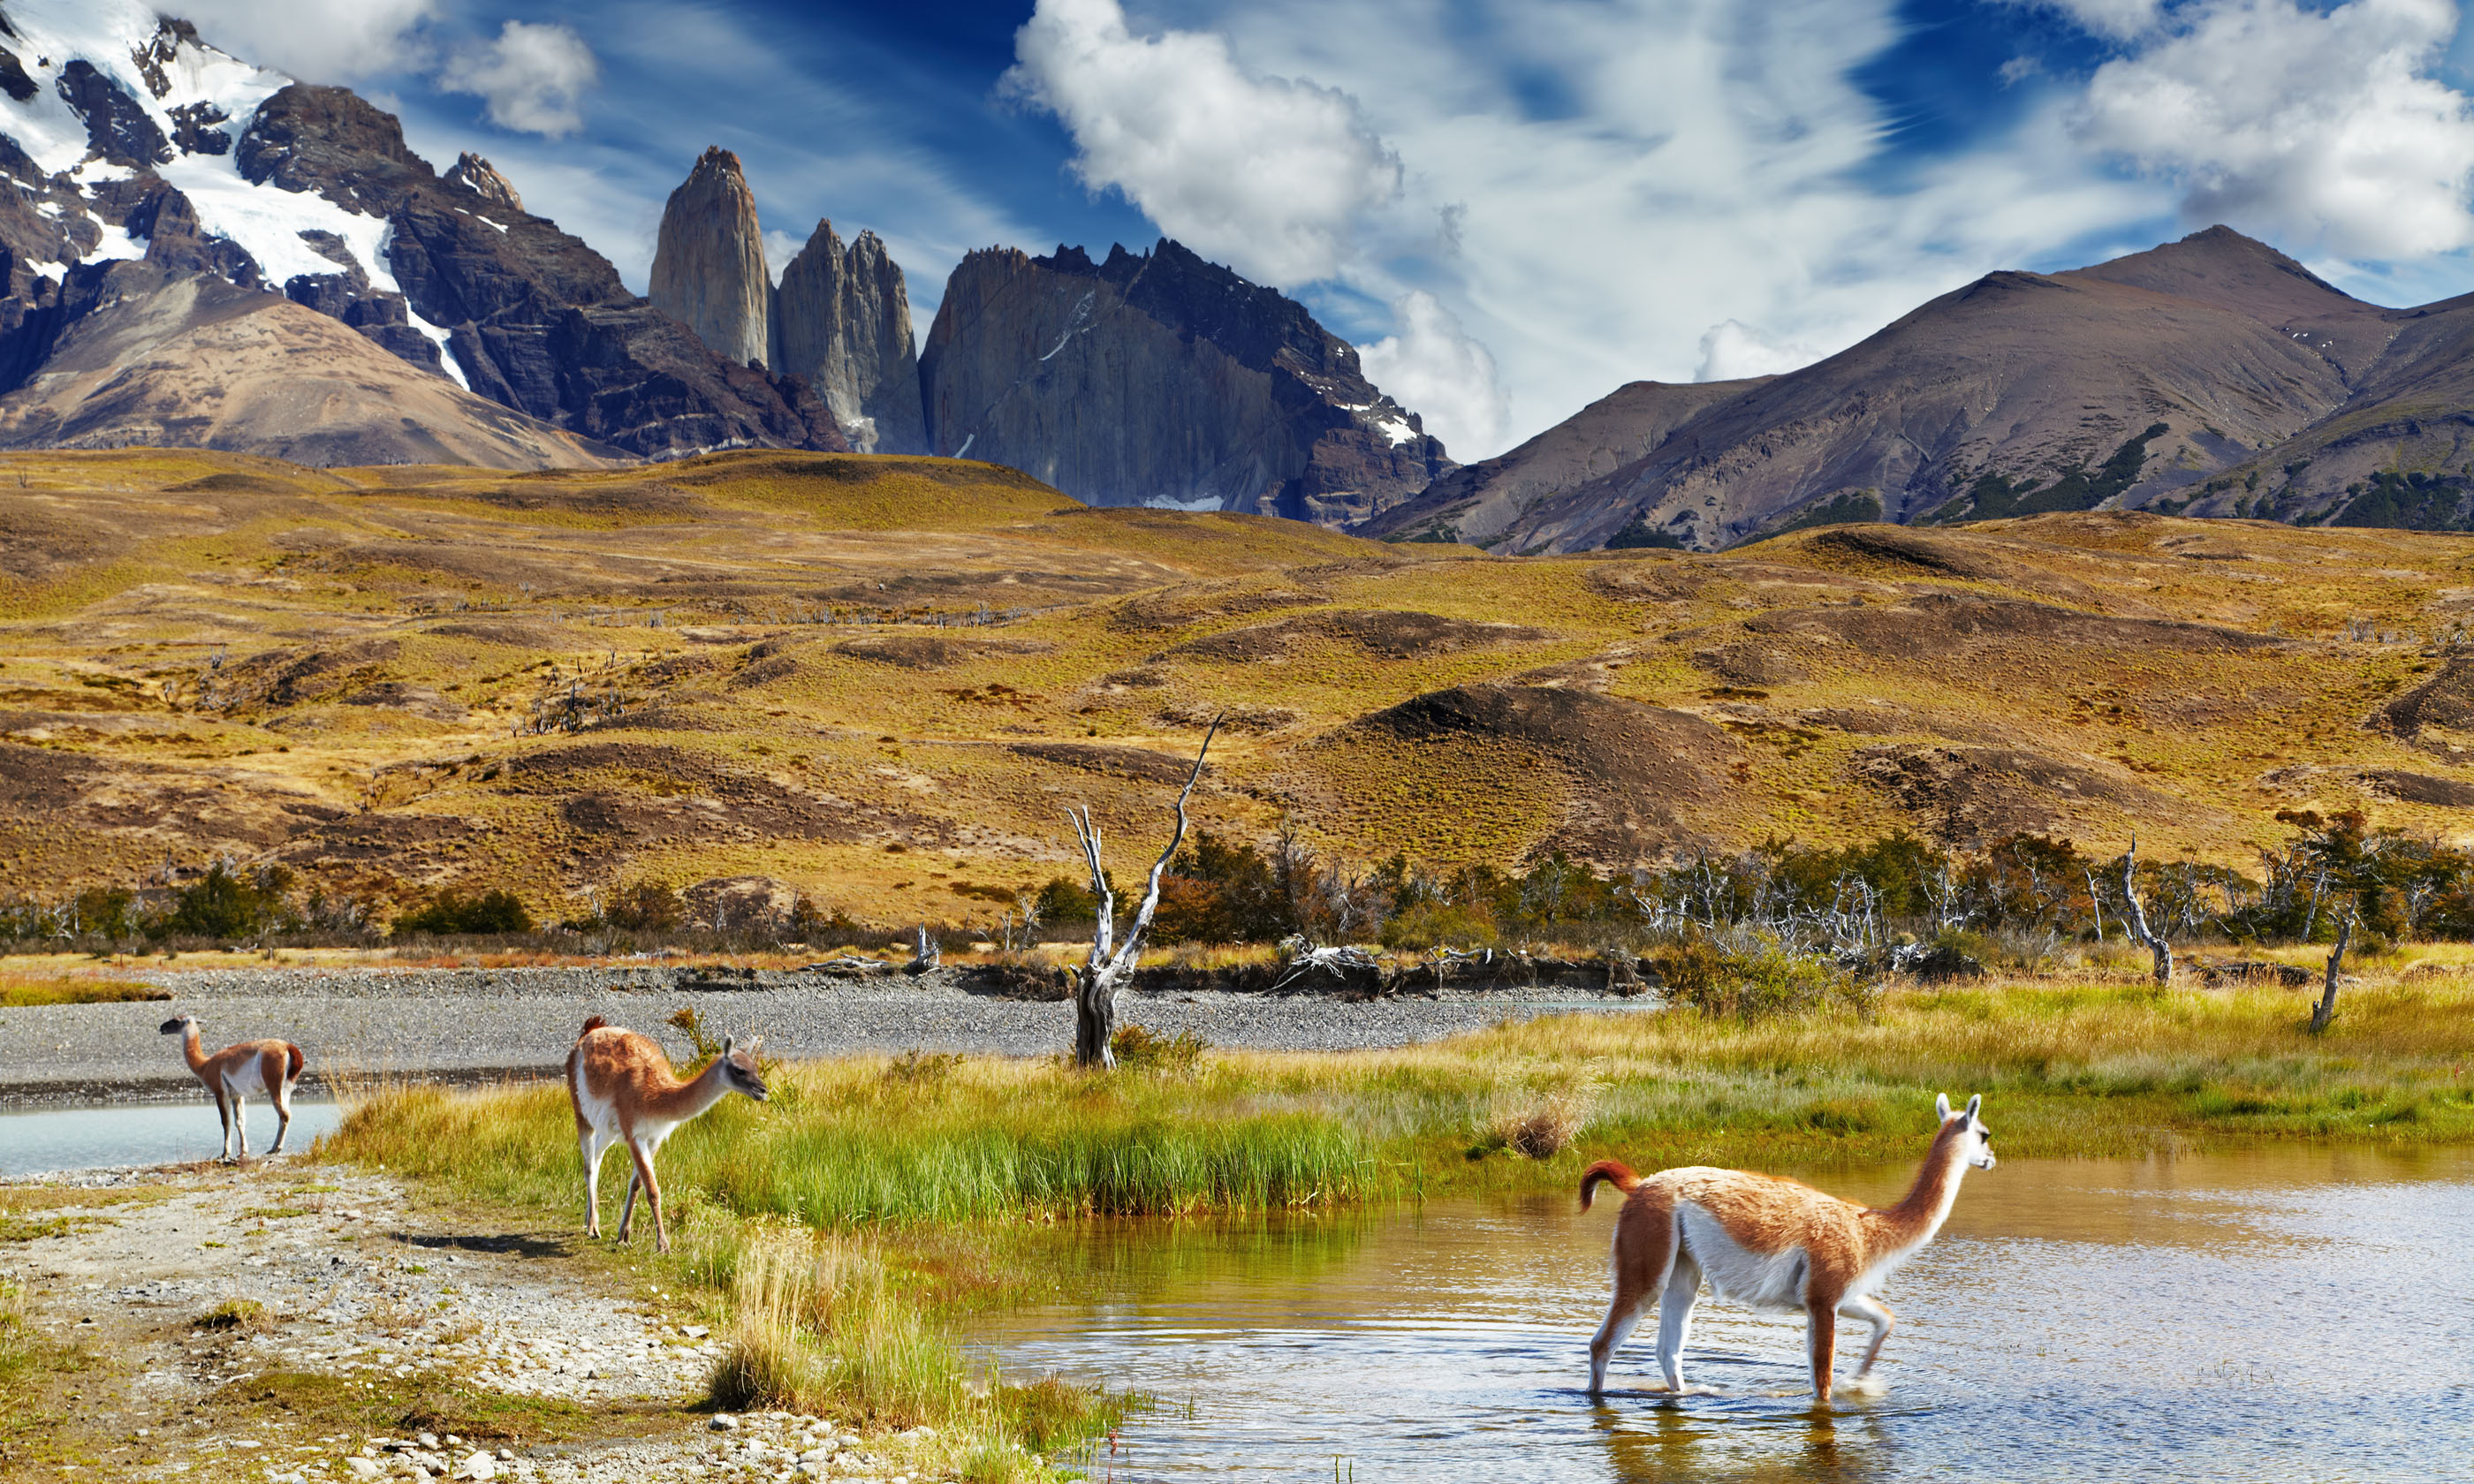 Torres del Paine National Park, Patagonia, Chile (Shutterstock.com. See main credit below)